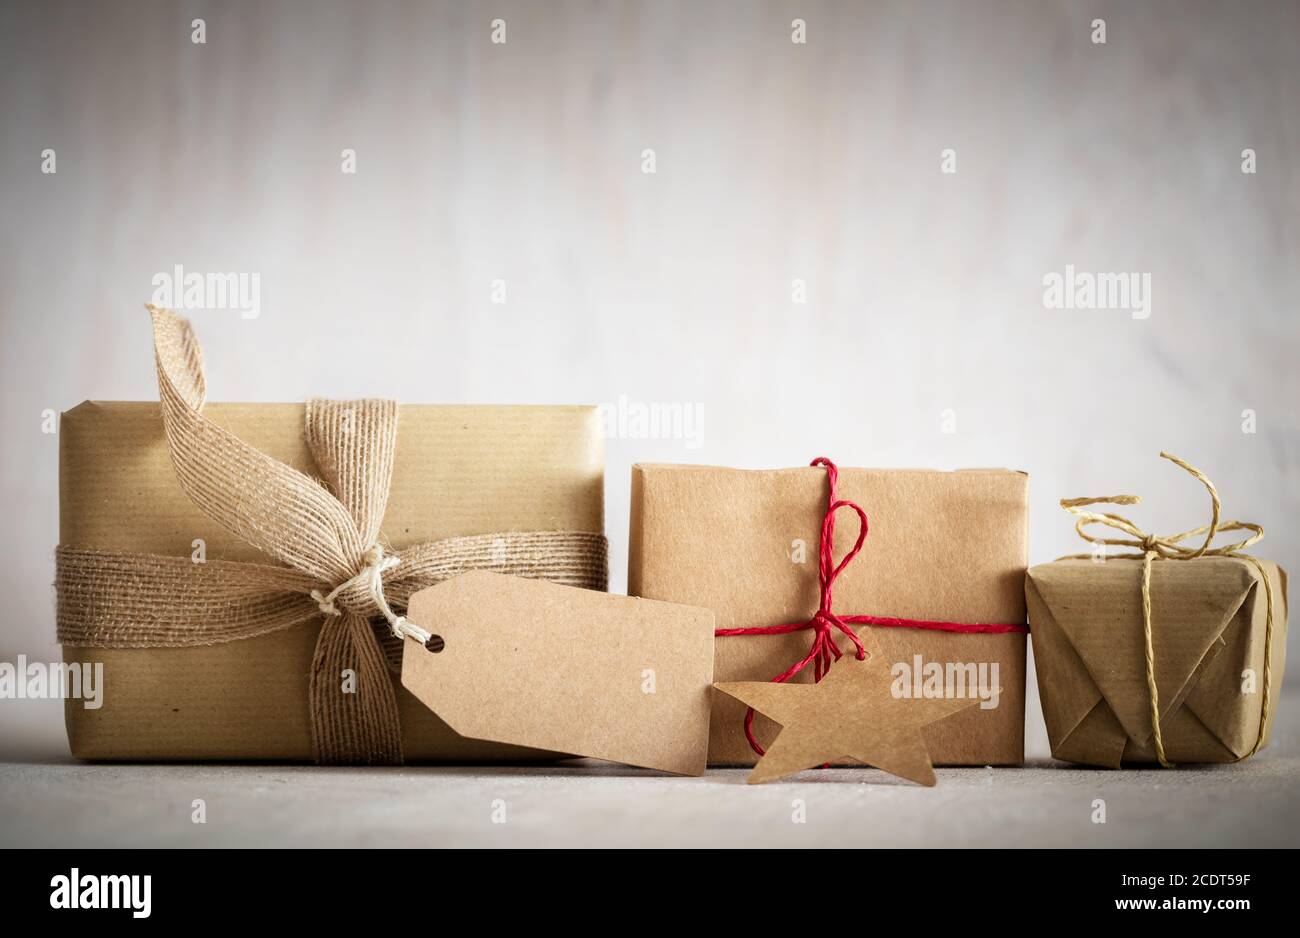 Rustic retro gifts, present boxes with tag. Christmas time, eco paper wrap. Stock Photo